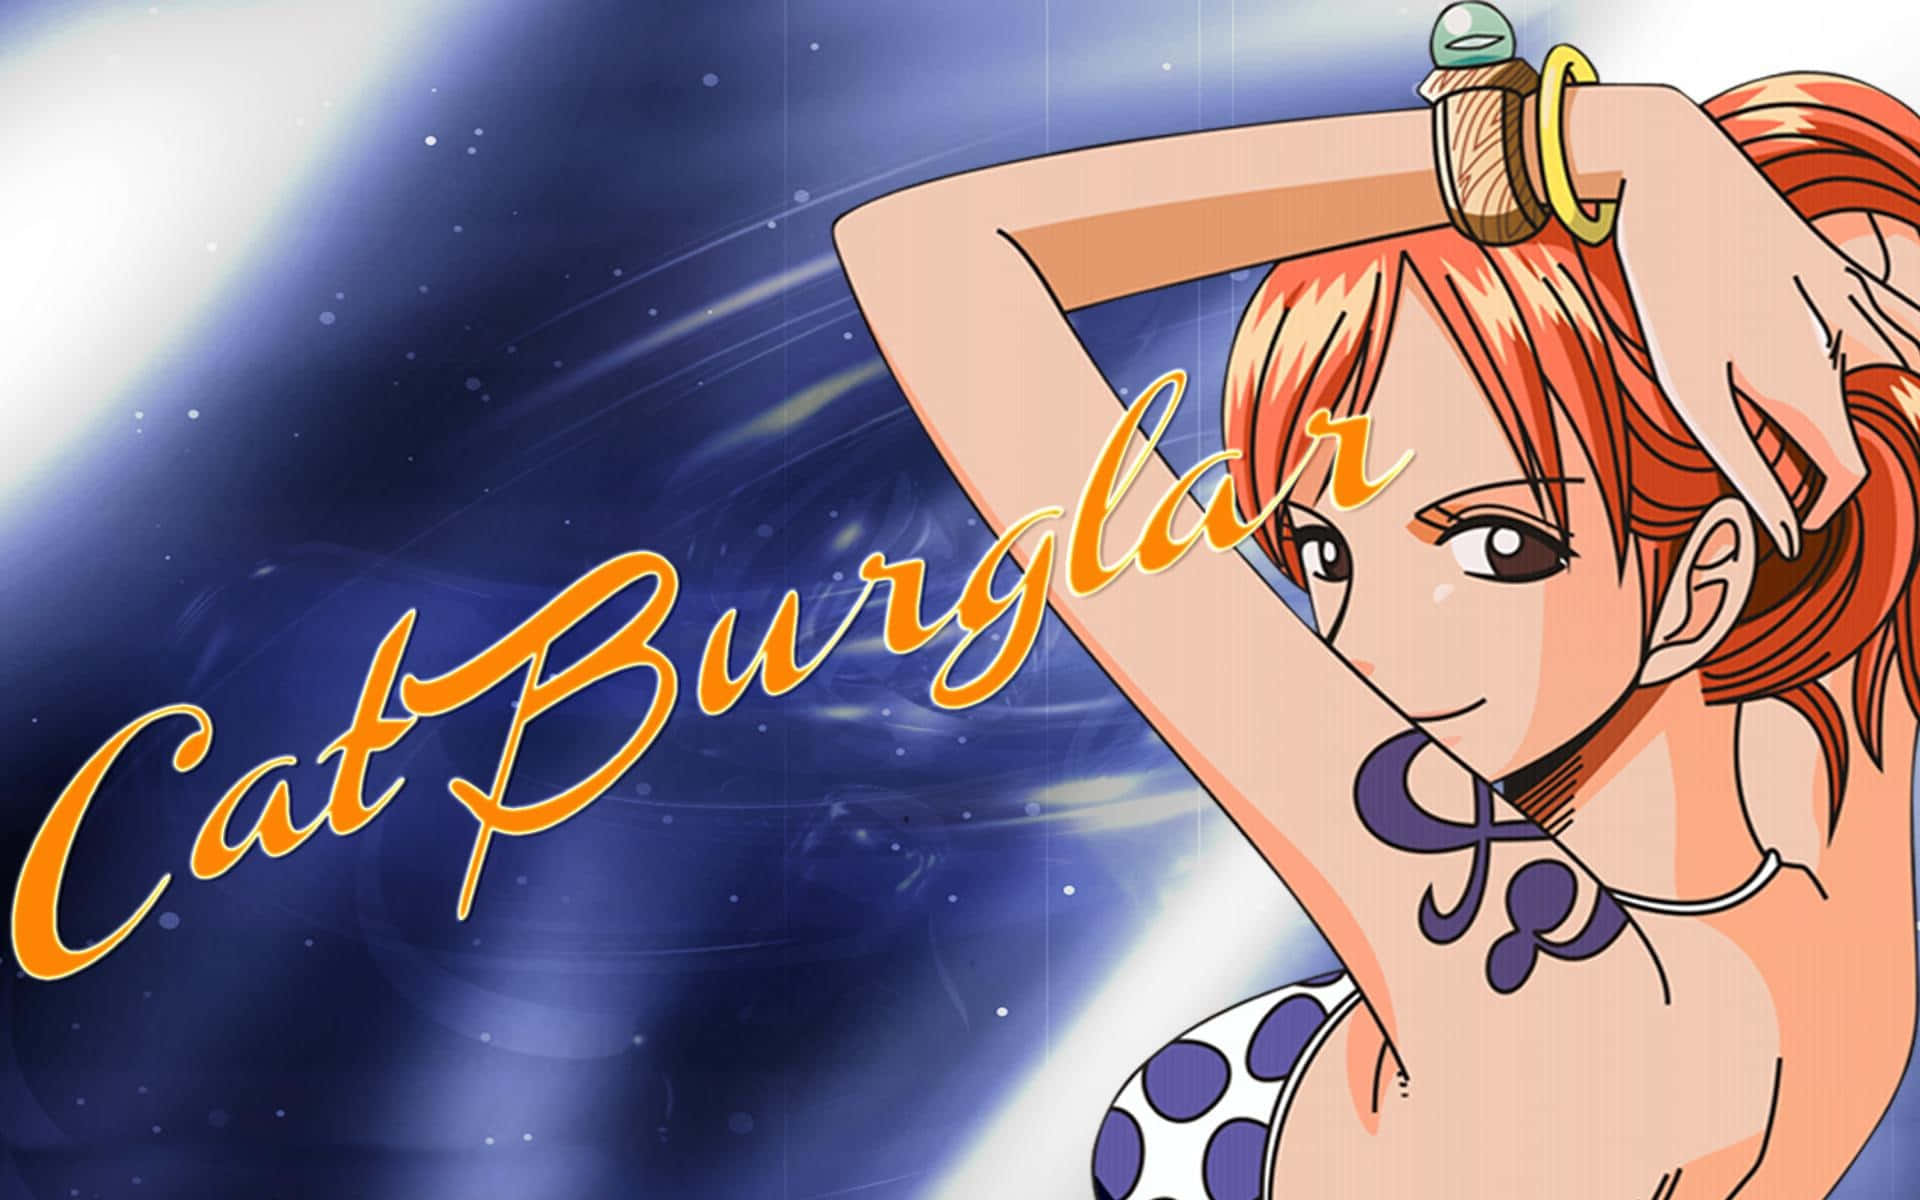 Free One Piece Wallpaper Downloads, [800+] One Piece Wallpapers for FREE |  